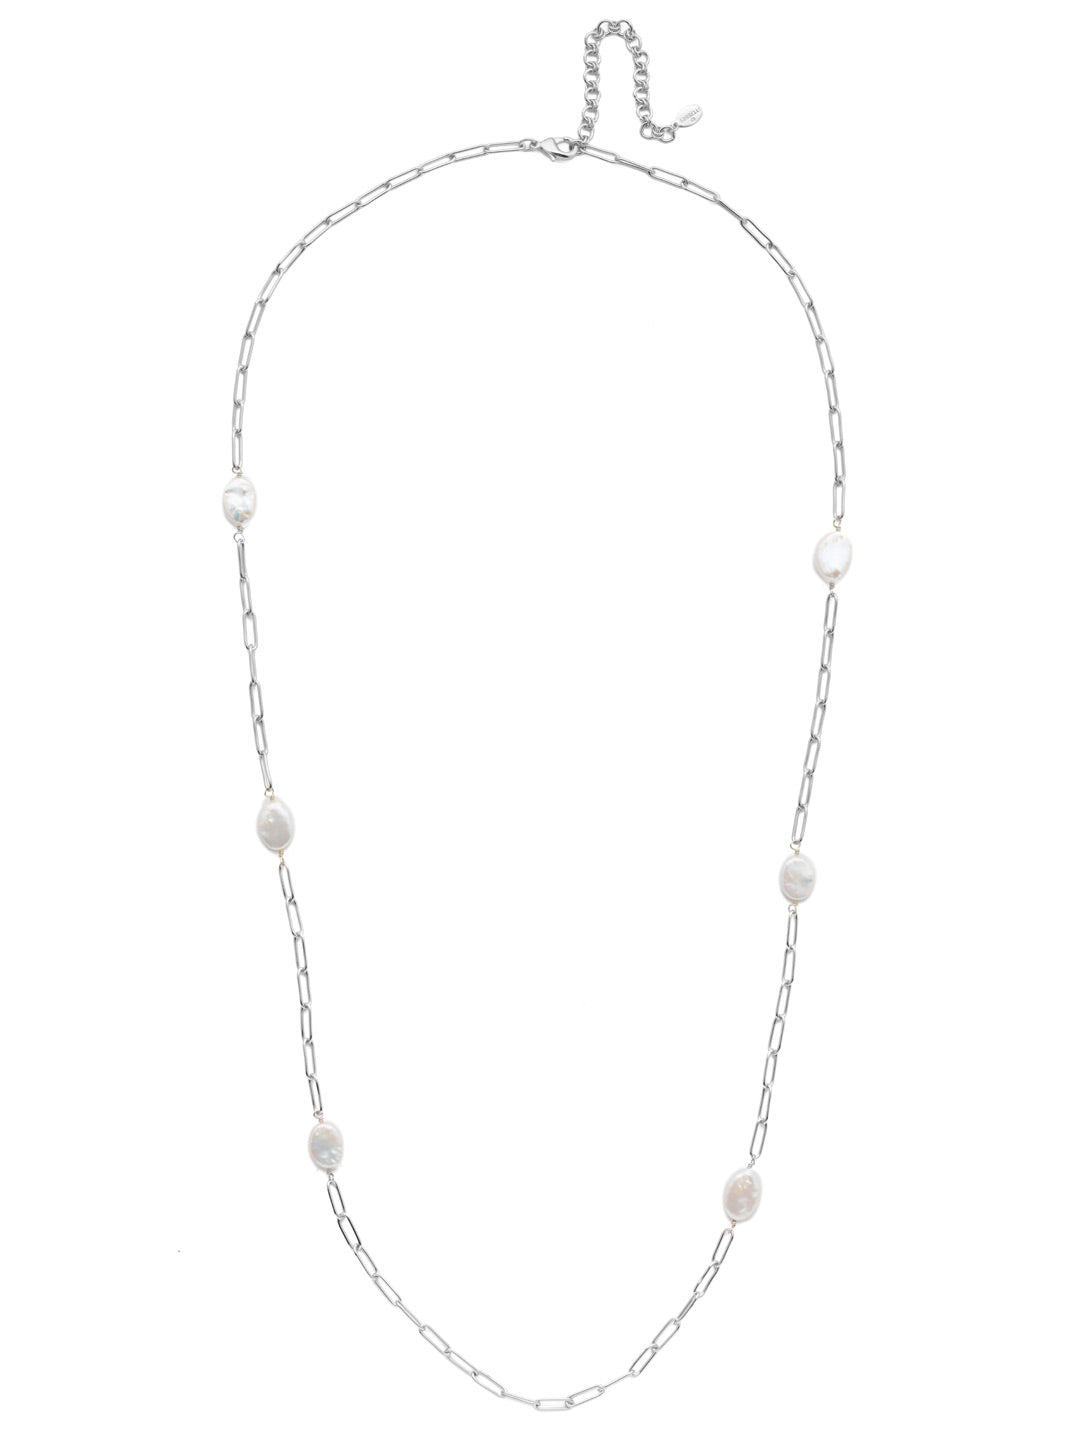 Cascade Long Necklace - 4NES6ASMDP - The Cascade Long Necklace features a delicate metal chain offset by a mirrorball-like pendant piece, reflecting light with its baquette and circular crystal sparklers. From Sorrelli's Modern Pearl collection in our Antique Silver-tone finish.